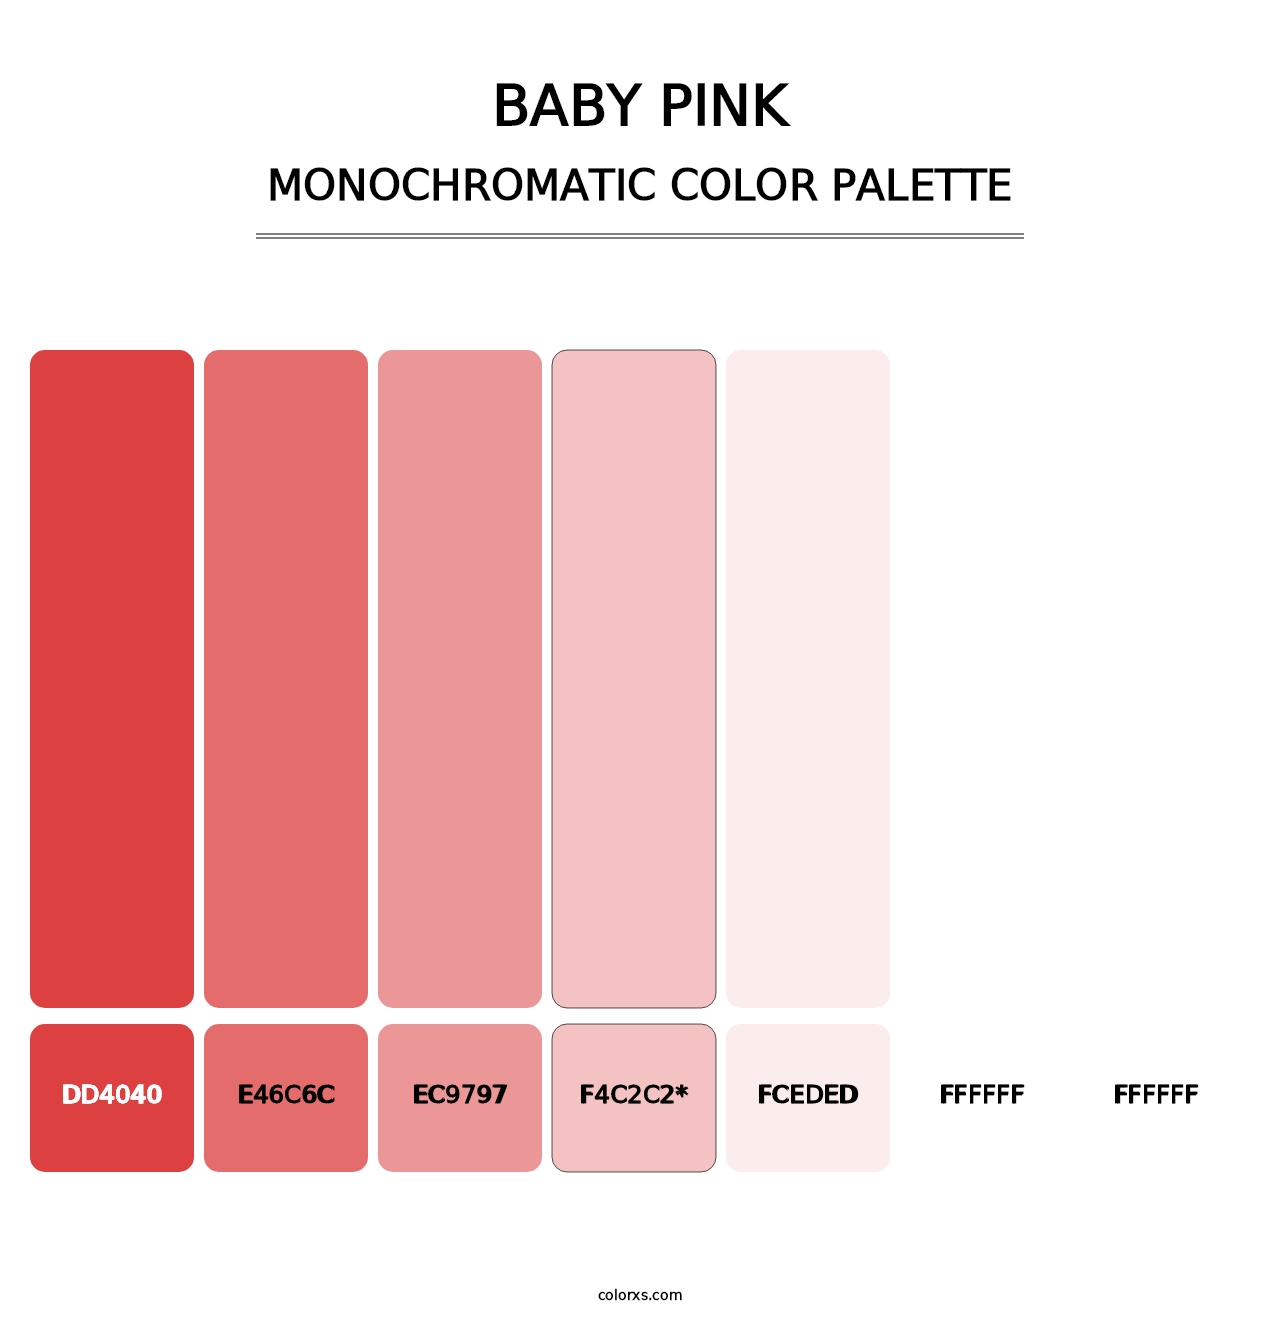 Baby Pink - Monochromatic Color Palette